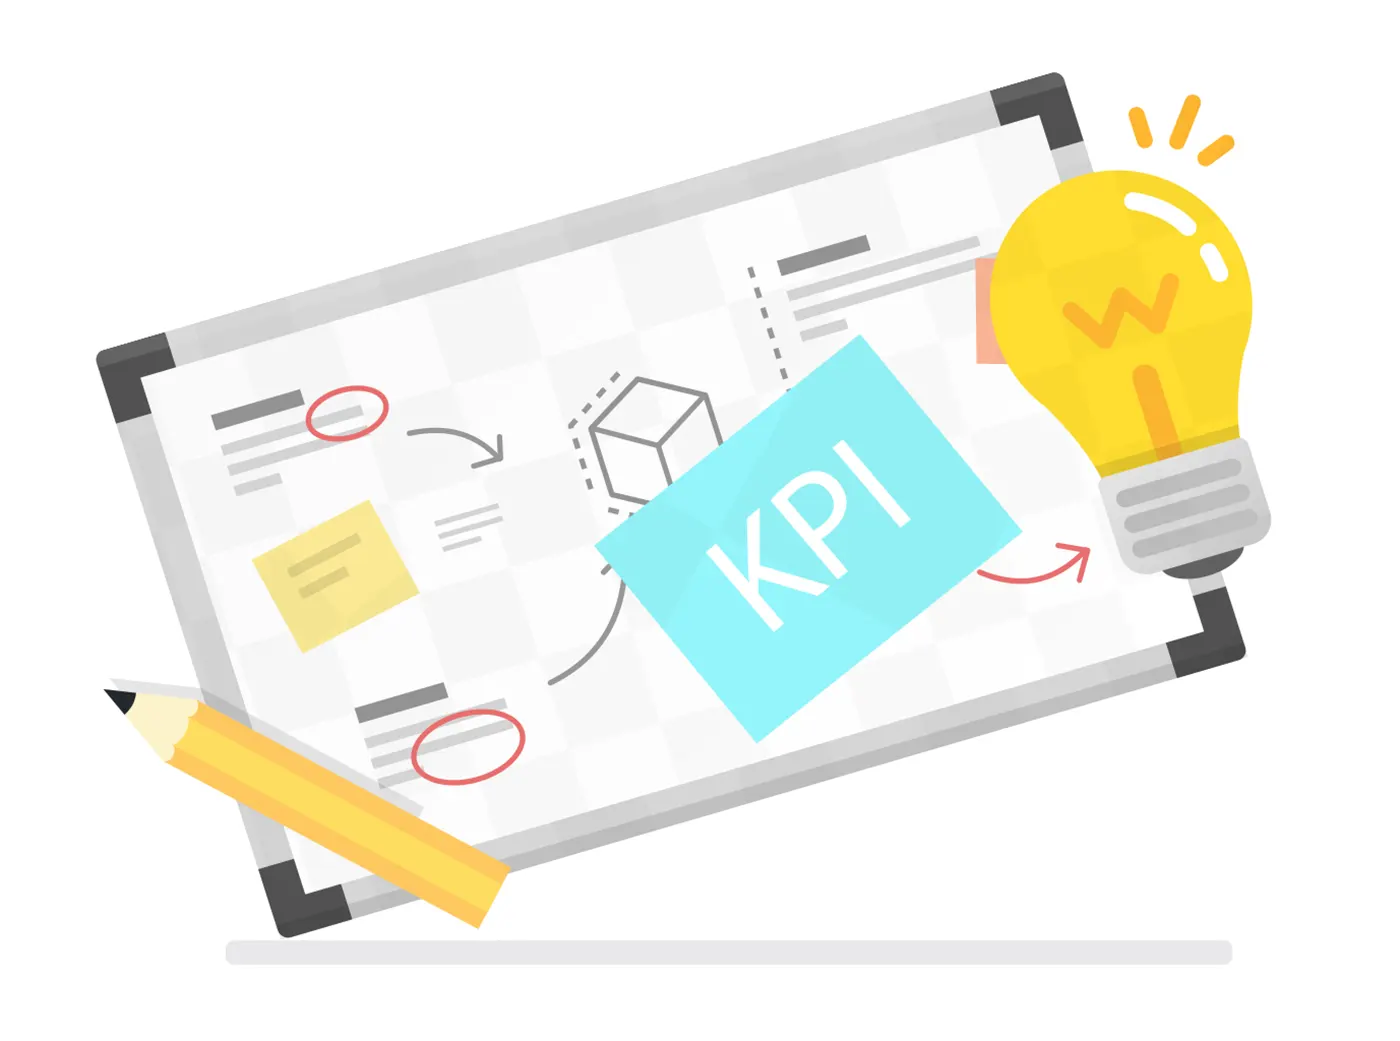 Identifying KPIs, an illustration showing a moodboard with ideas for finding KPIs